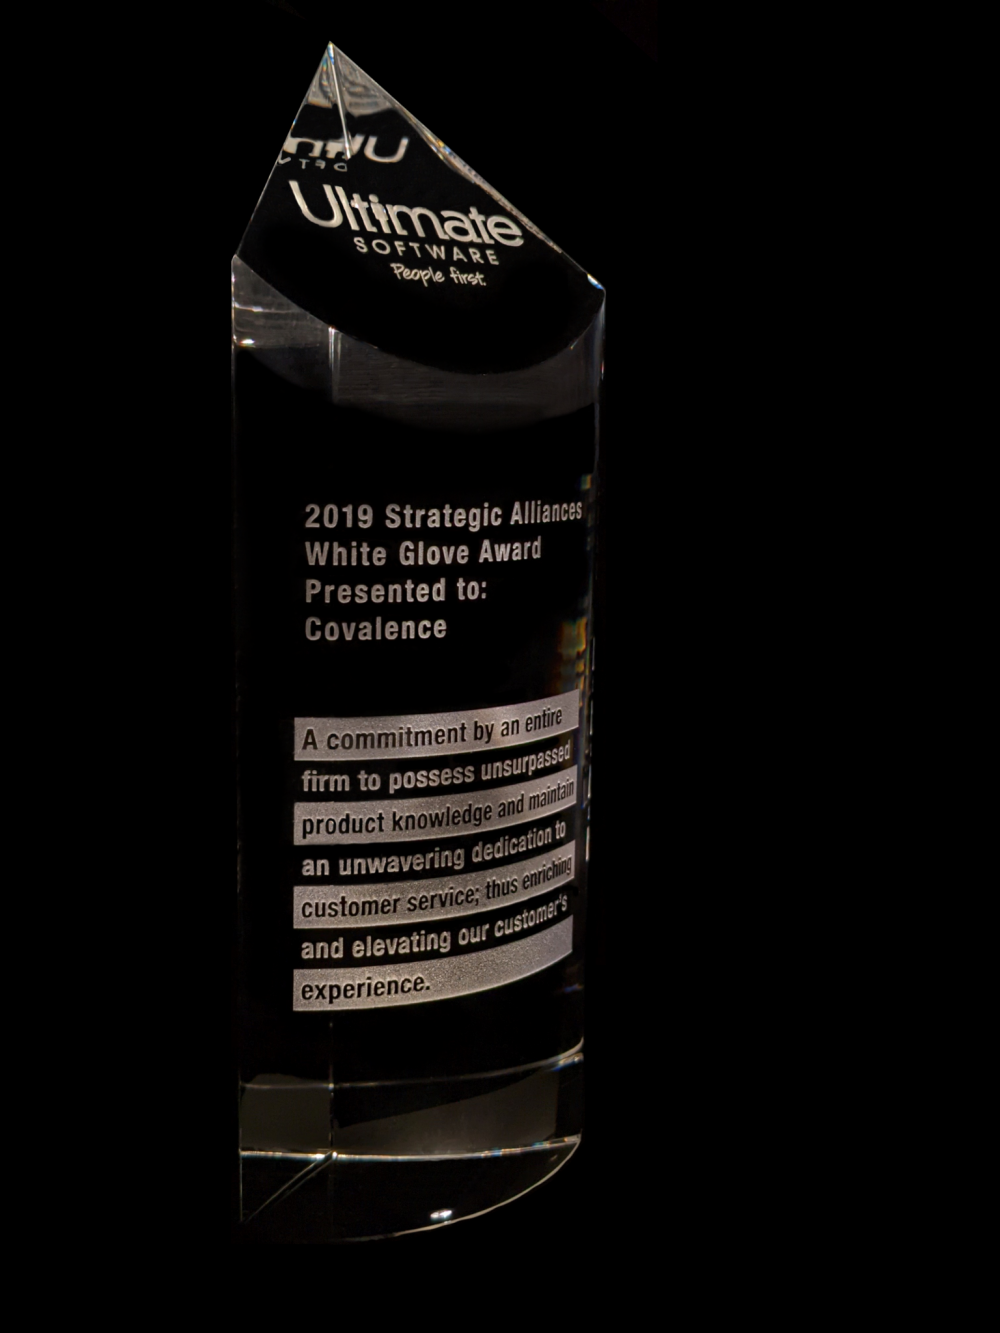 Covalence Consulting, Inc. Announces Multiple Strategic Alliance Awards from UKG